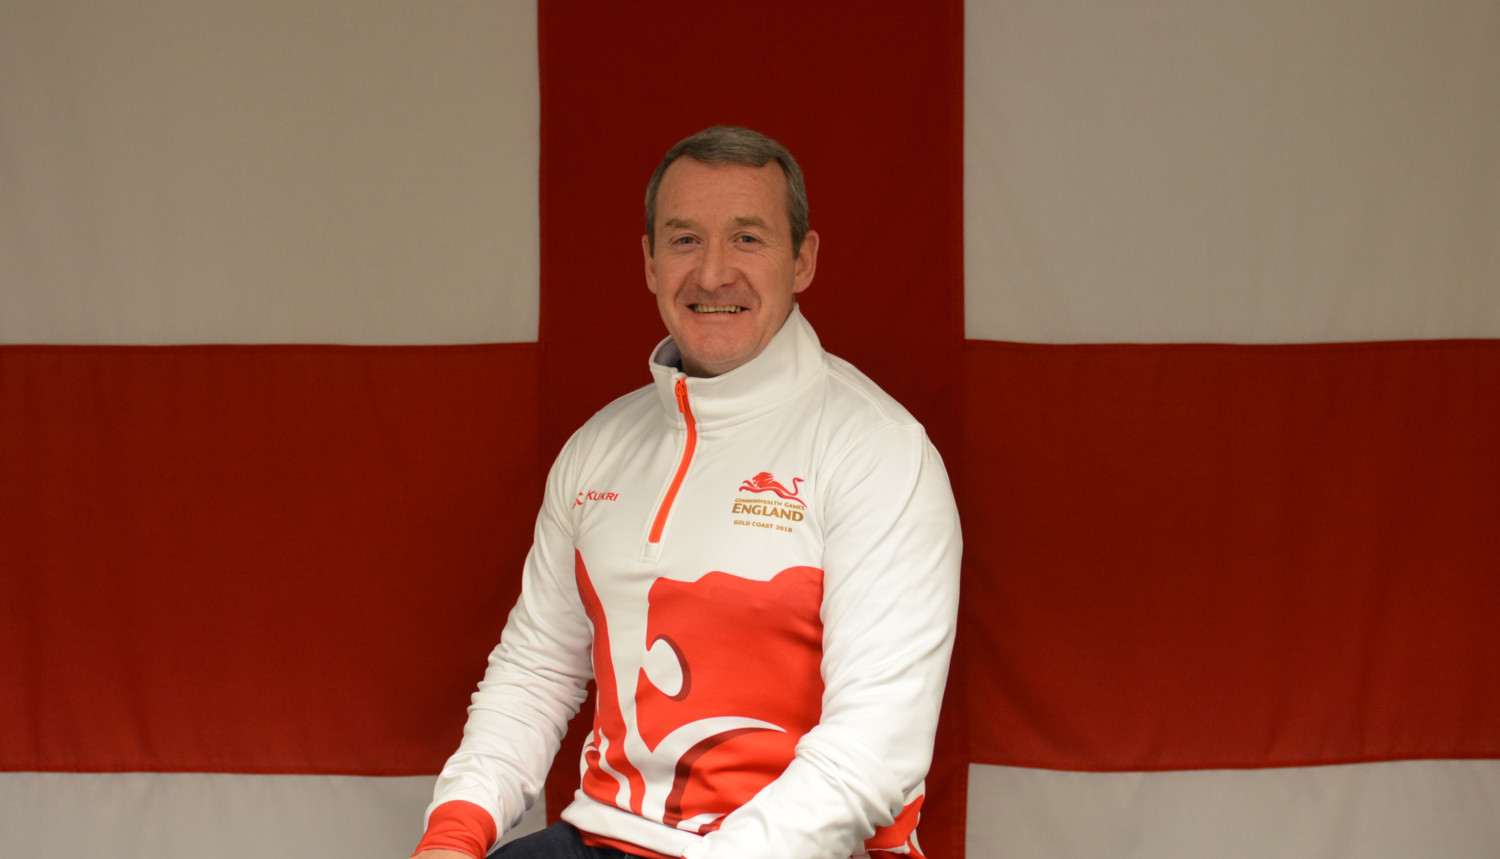 Darren Chapple has been appointed as England's boxing team leader for the country's home Birmingham 2022 Commonwealth Games ©England Boxing